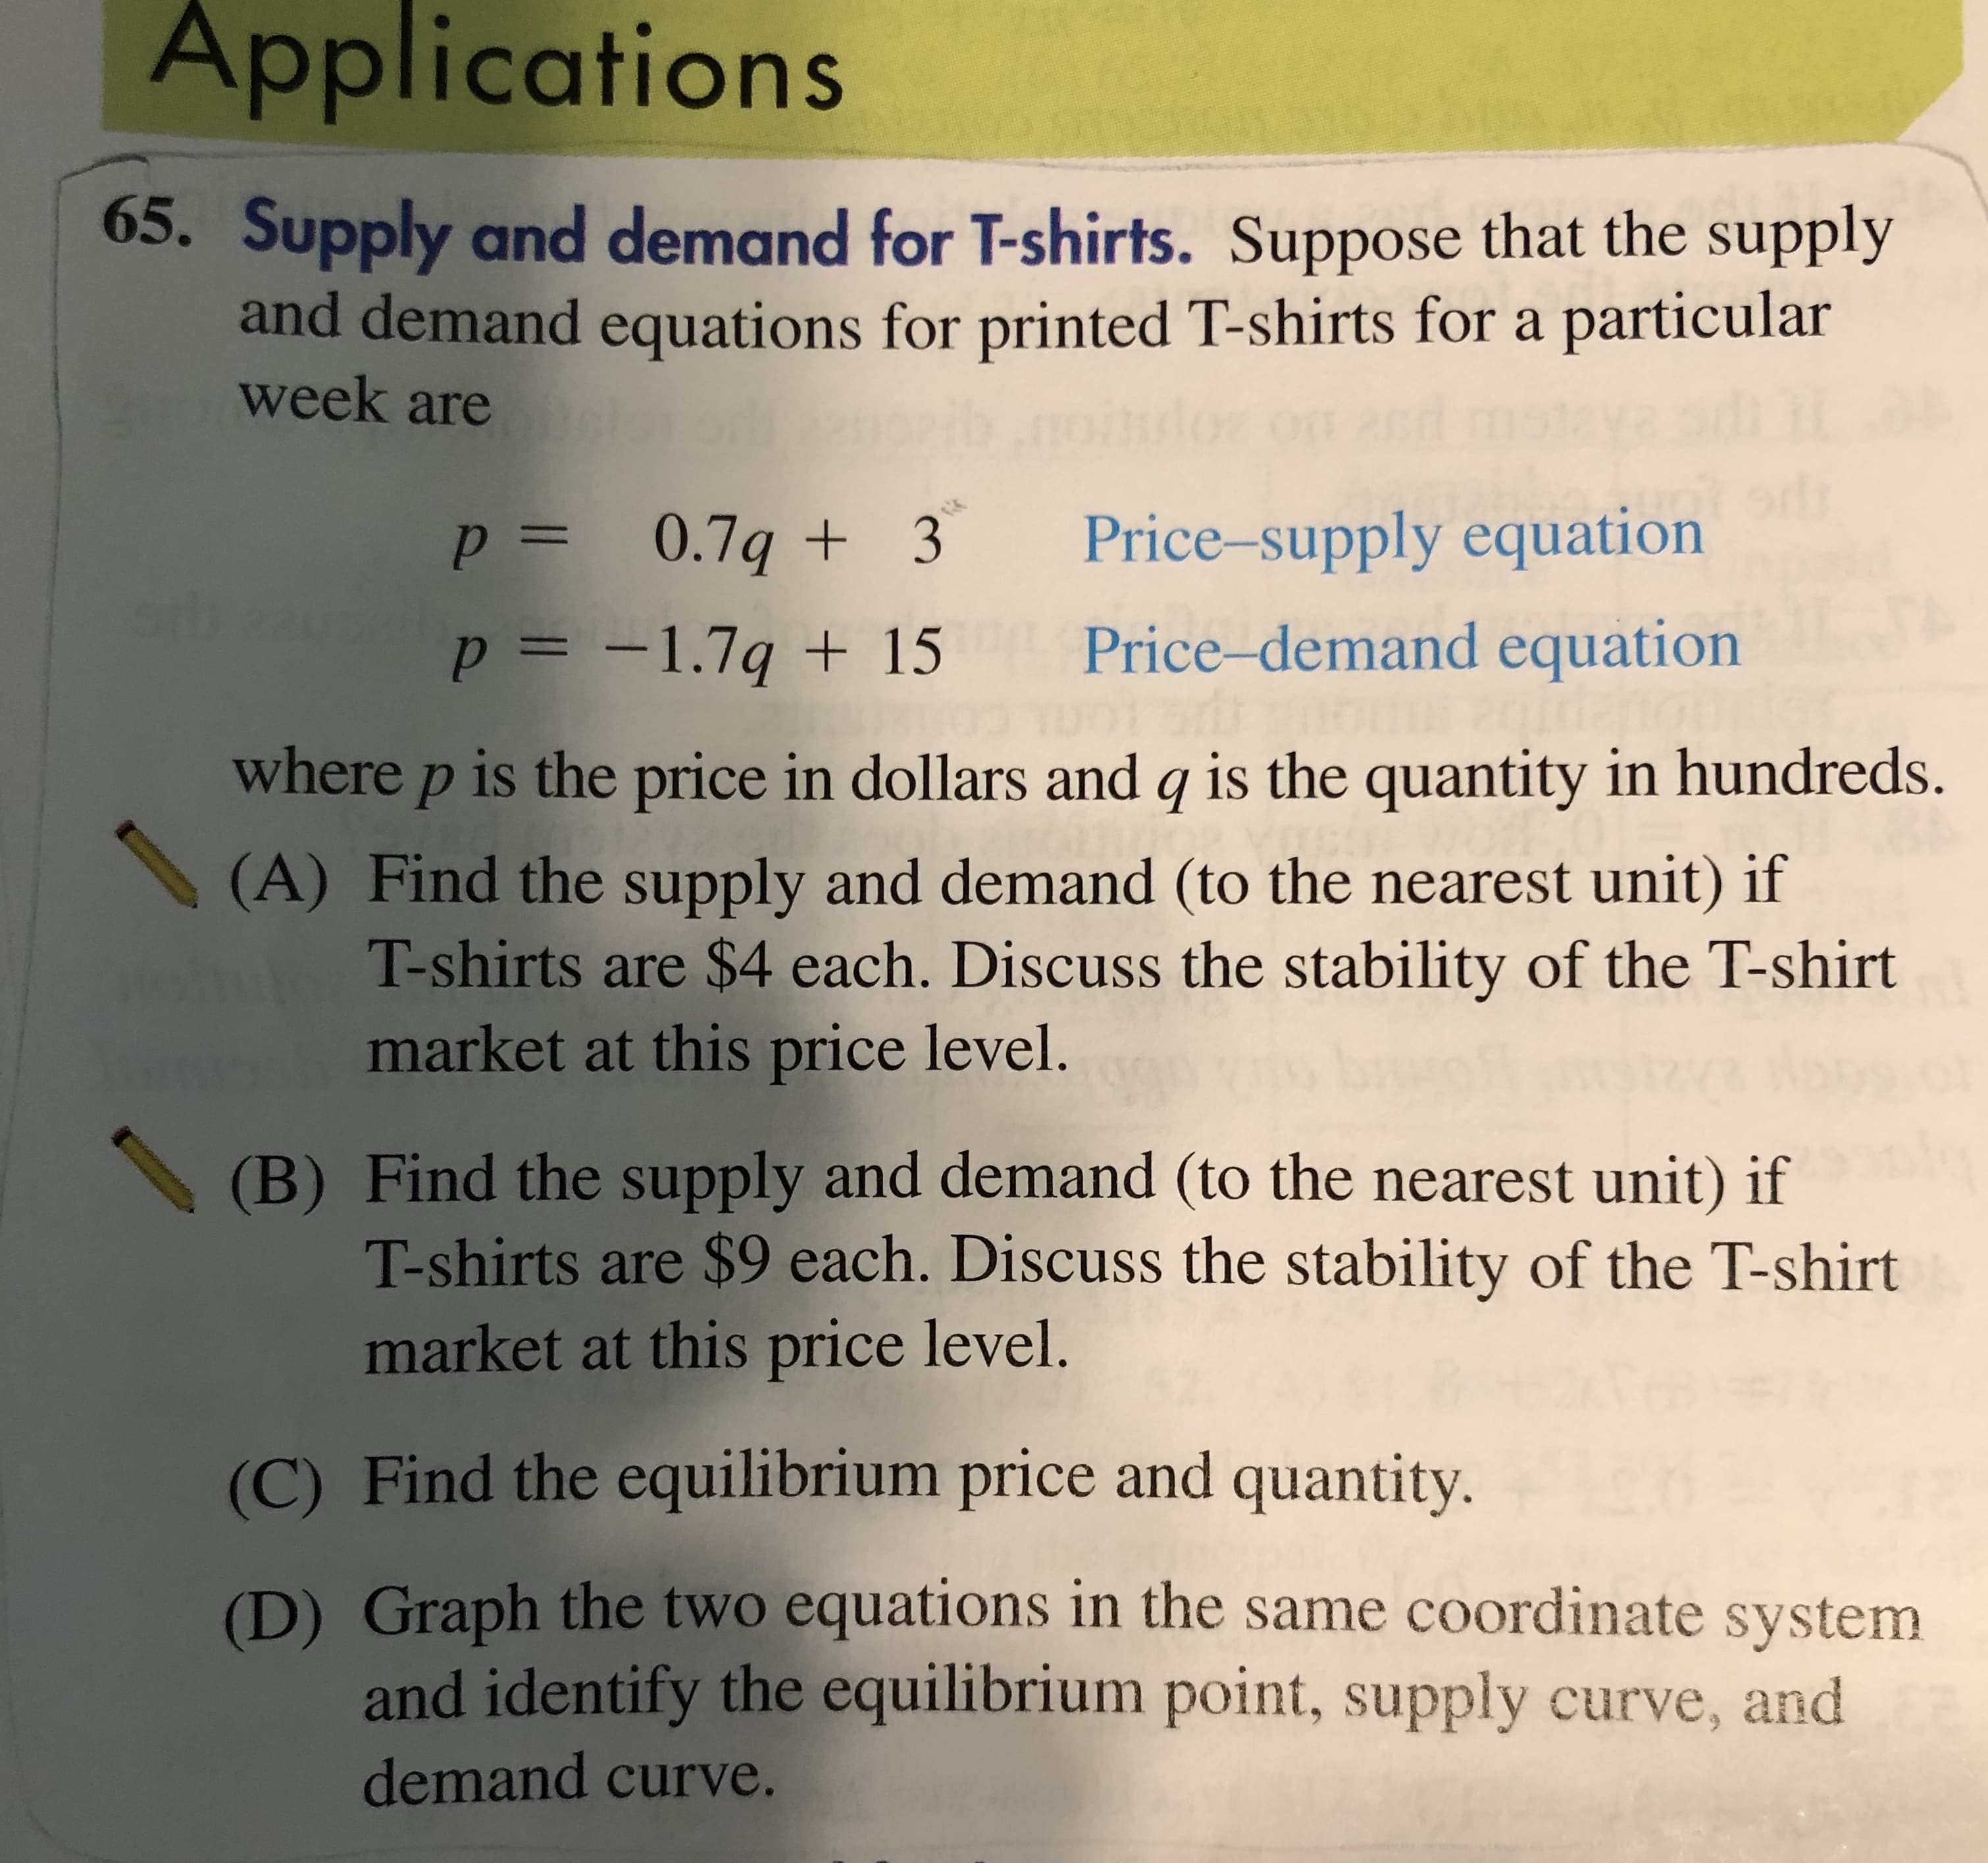 Applications
65. Supply and demand for T-shirts. Suppose that the supply
and demand equations for printed T-shirts for a particular
week are
Price-supply equation
p= 0.7q + 3
Price-demand equation
p = -1.7q + 15
%3D
where p is the price in dollars and q is the quantity in hundreds.
(A) Find the supply and demand (to the nearest unit) if
T-shirts are $4 each. Discuss the stability of the T-shirt
market at this price level.
(B) Find the supply and demand (to the nearest unit) if
T-shirts are $9 each. Discuss the stability of the T-shirt
market at this price level.
(C) Find the equilibrium price and quantity.
(D) Graph the two equations in the same coordinate system
and identify the equilibrium point, supply curve, and
demand curve.
